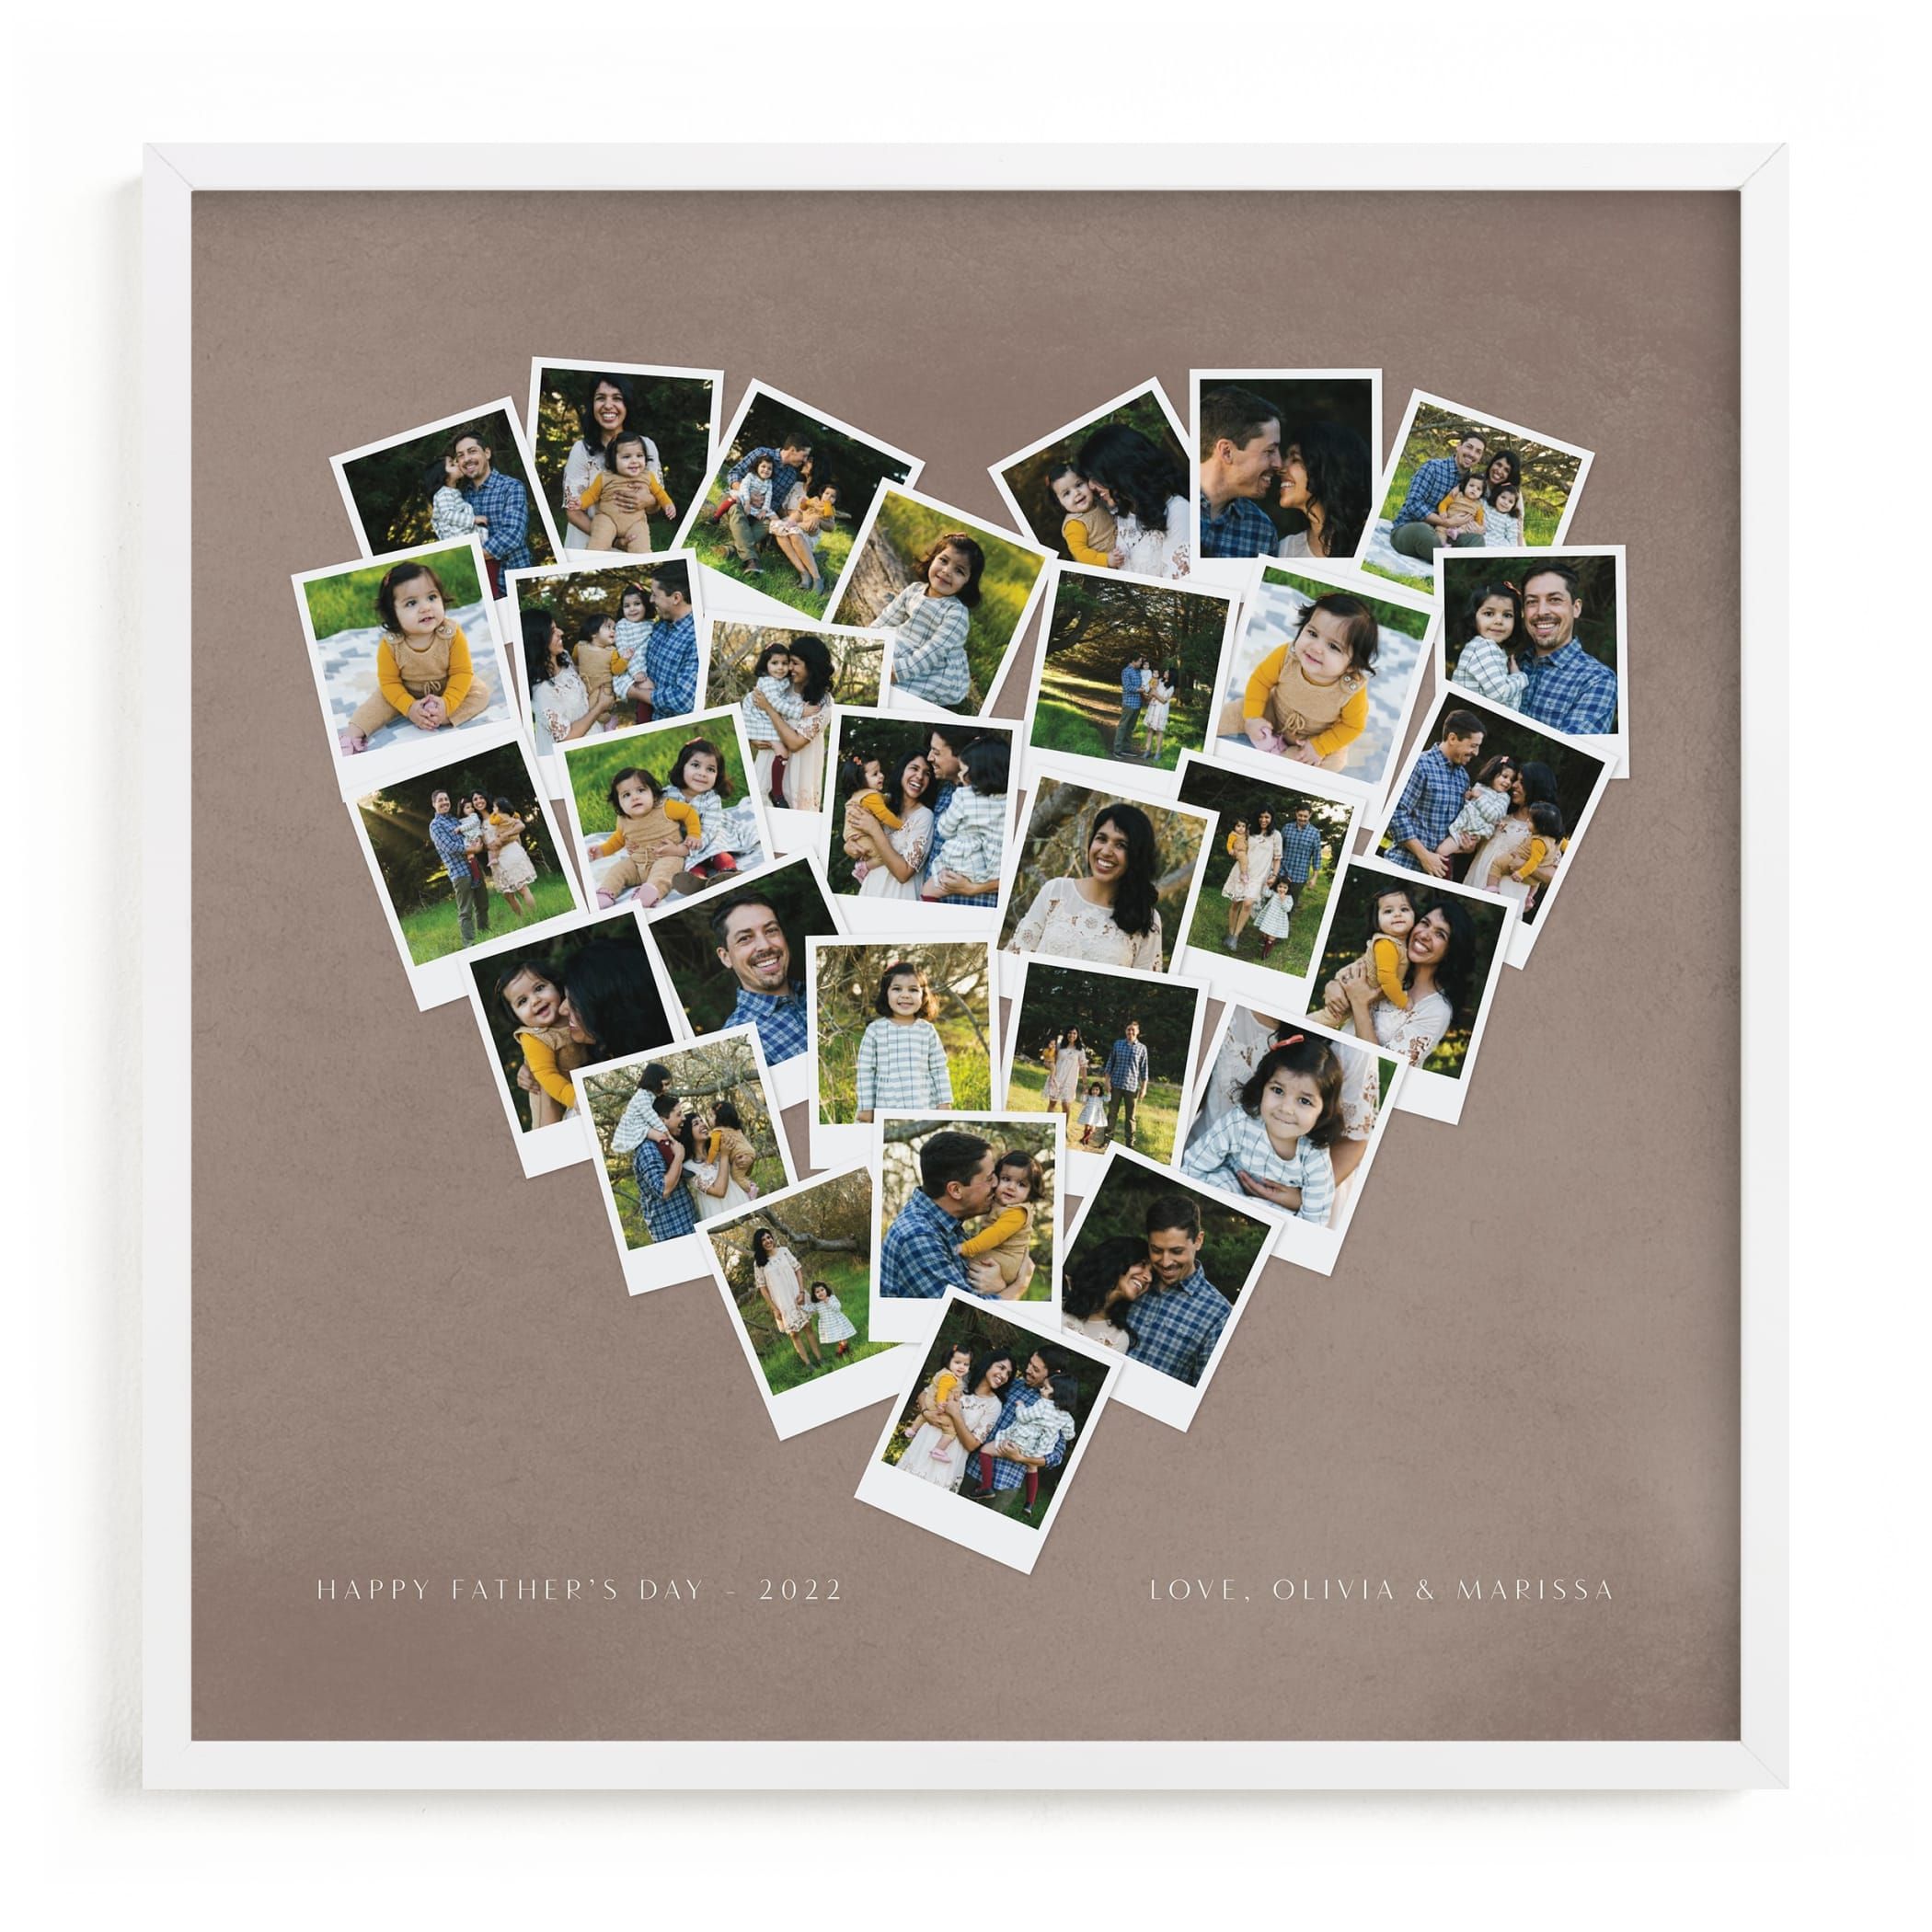 "Painted Hues Heart Snapshot Mix® Warm" - Custom Photo Art Print by Minted. | Minted